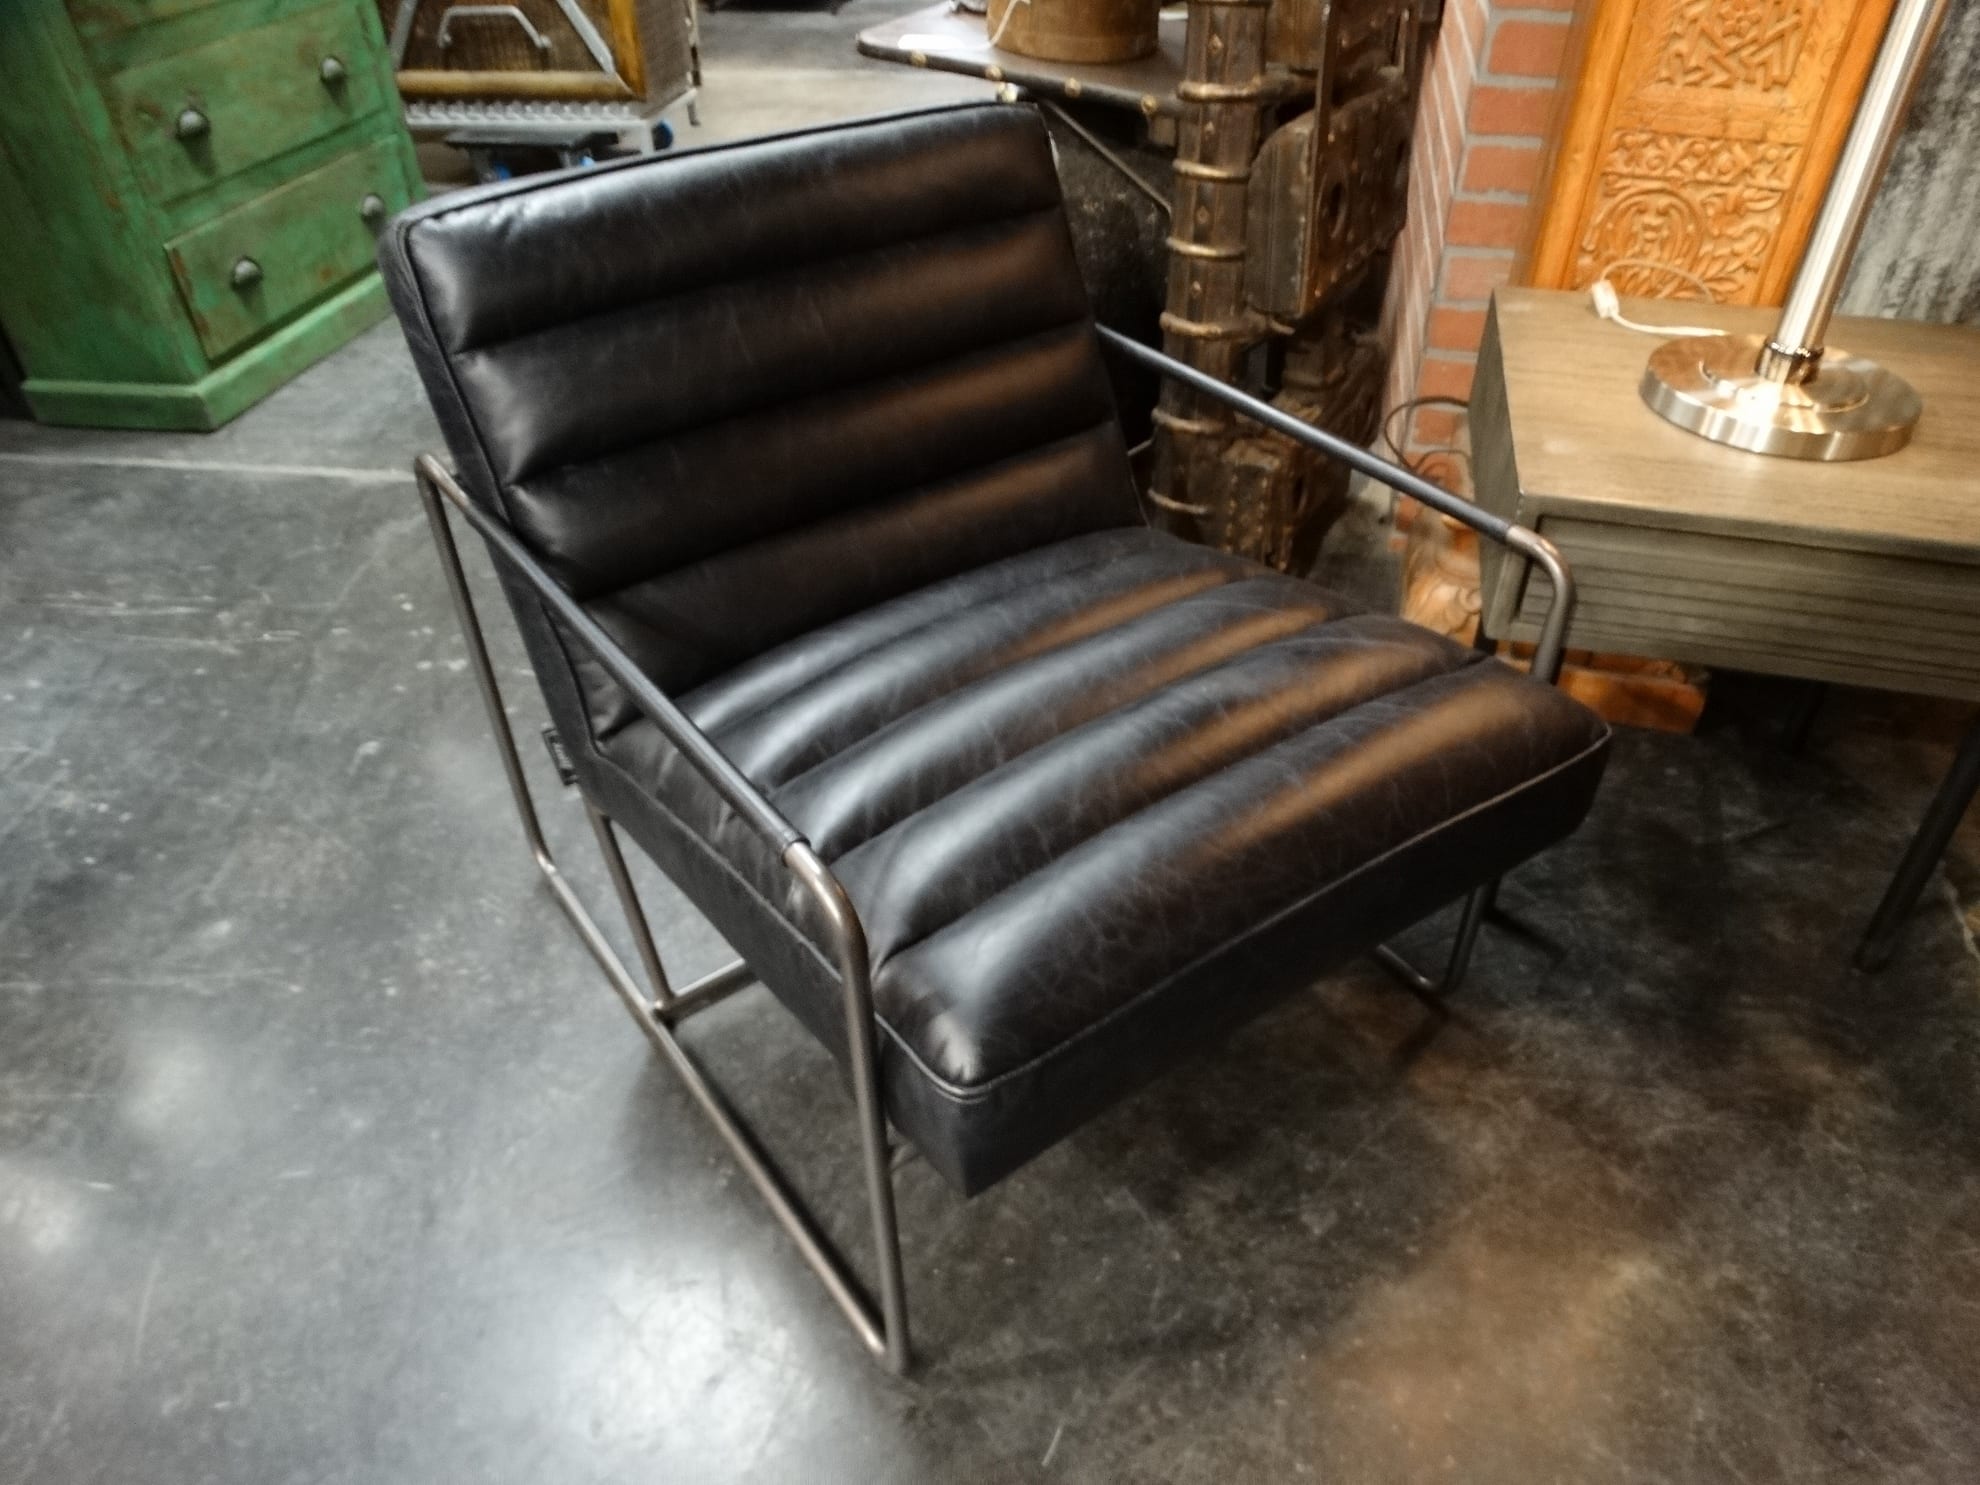 Elegant Black Leather Chair is roomy and has a classic flair.